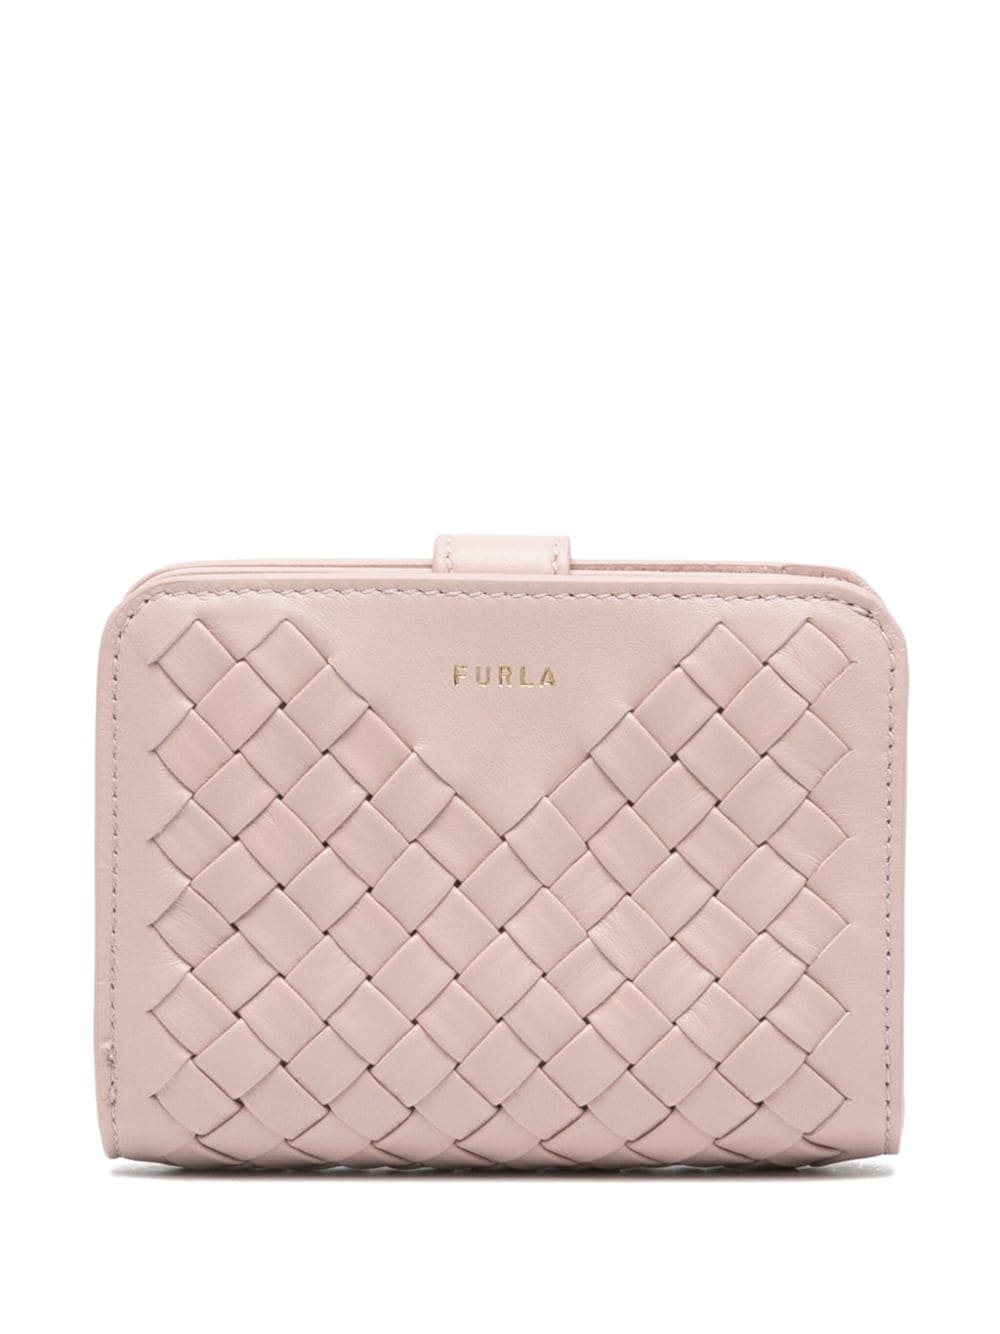 Image 1 of Furla small Gerla leather wallet